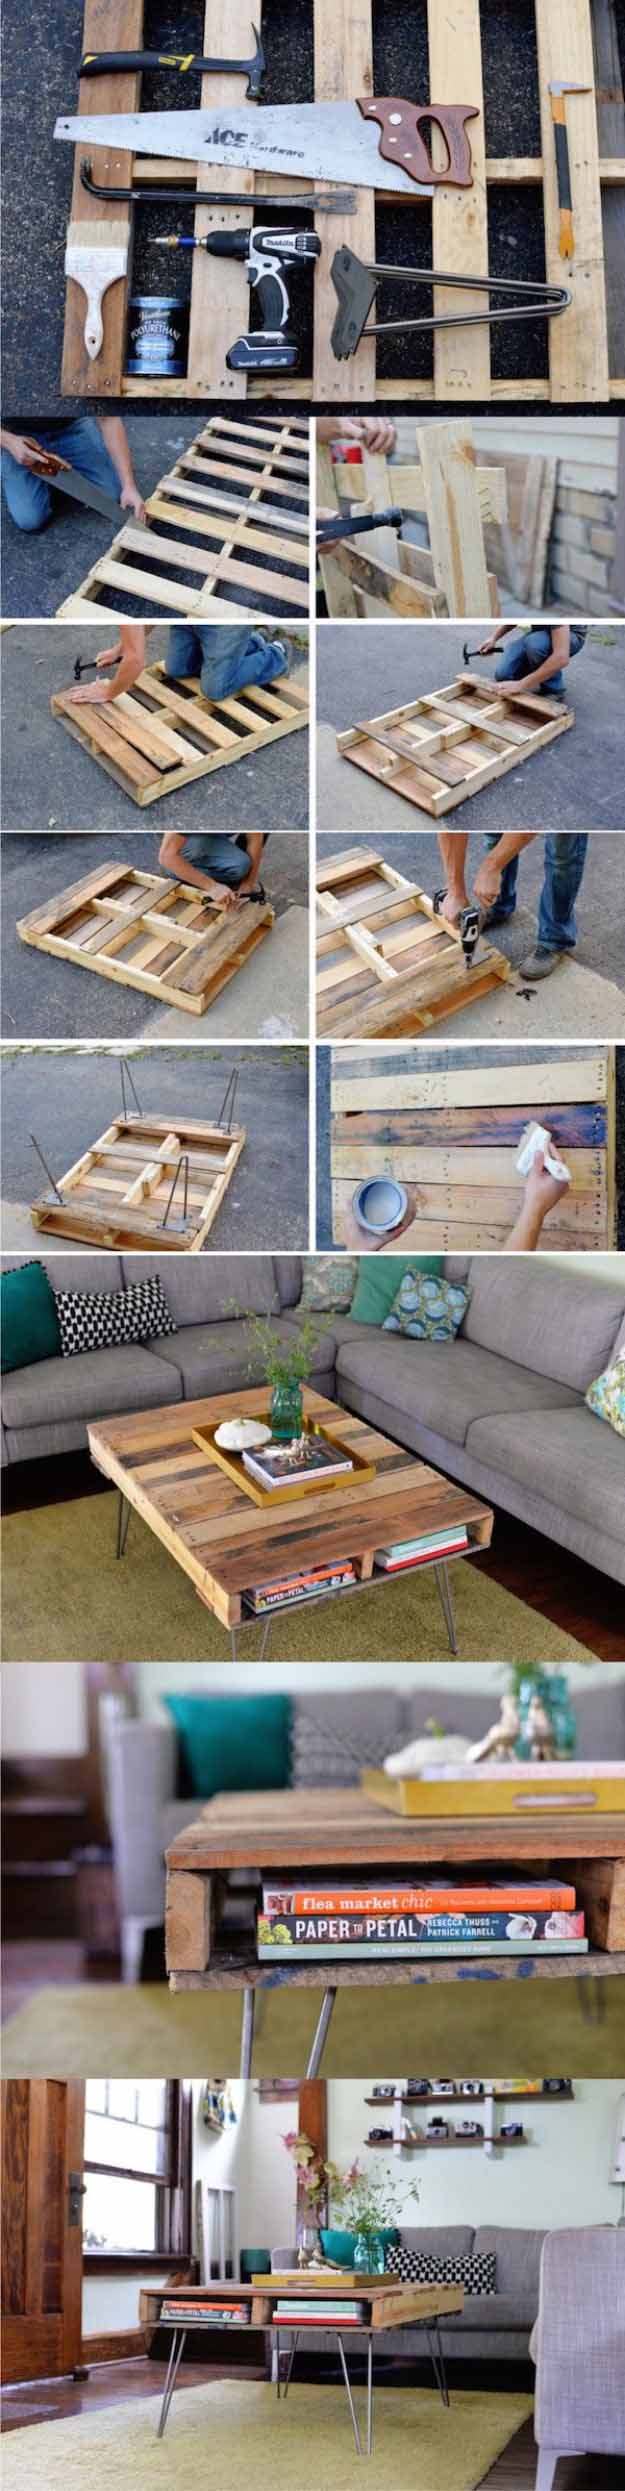 Easy DIY Home Decor Projects| DIY Pallet Furniture Tutorial | Cheap Coffee Table Ideas | DIY Projects and Crafts by DIY JOY #coffeetables #diyfurniture